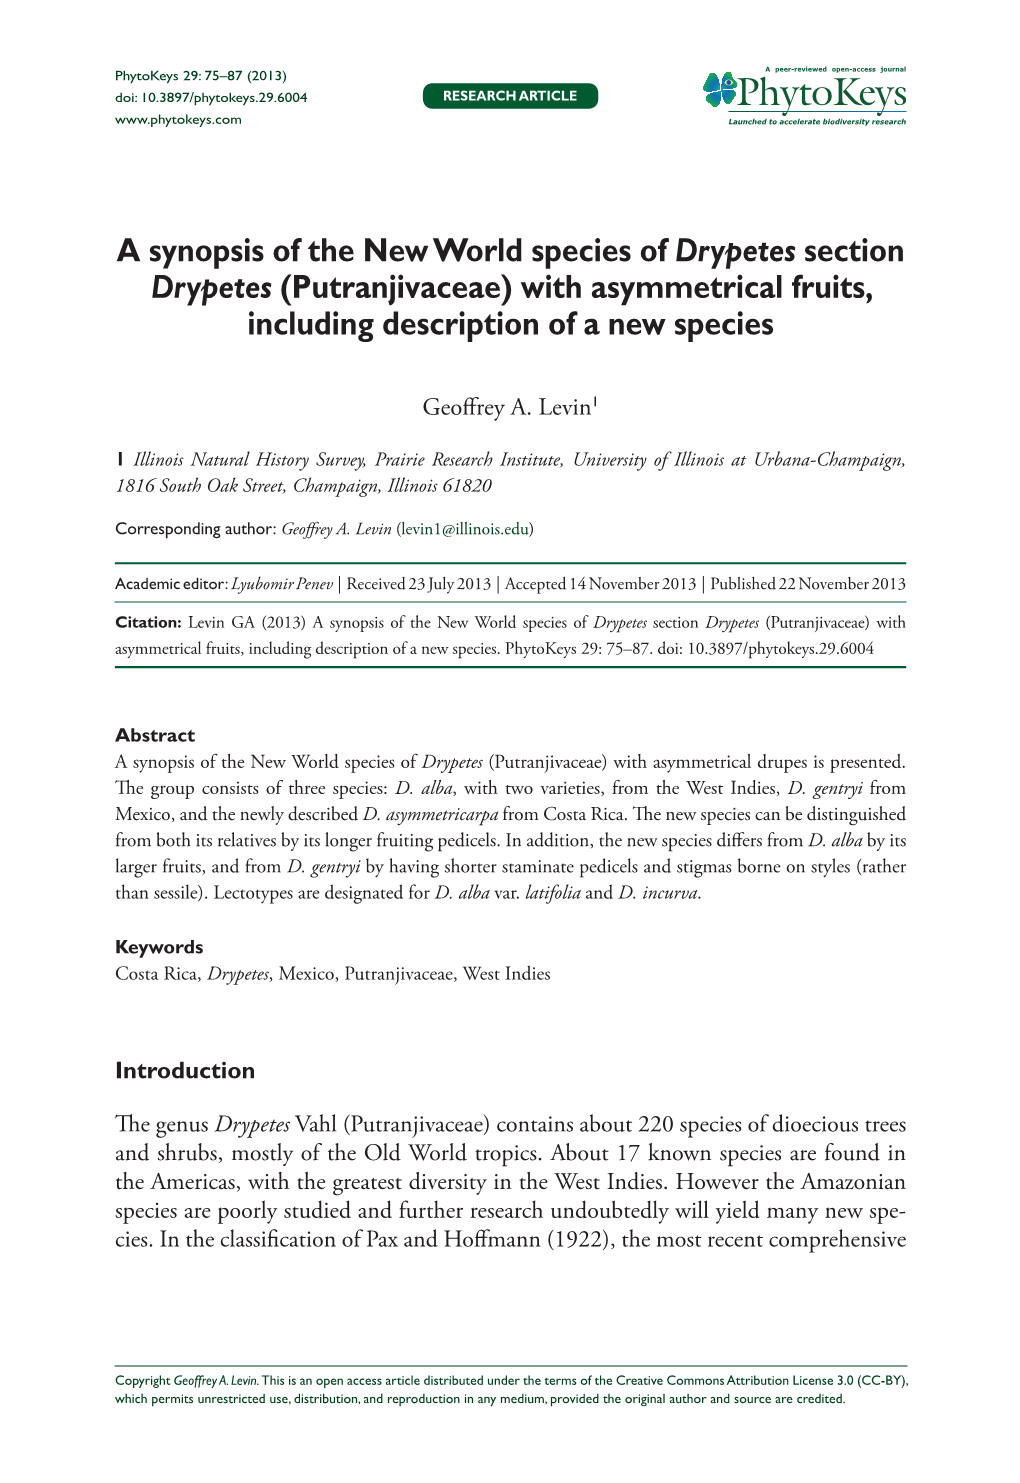 A Synopsis of the New World Species of Drypetes Section Drypetes (Putranjivaceae) with Asymmetrical Fruits, Including Description of a New Species